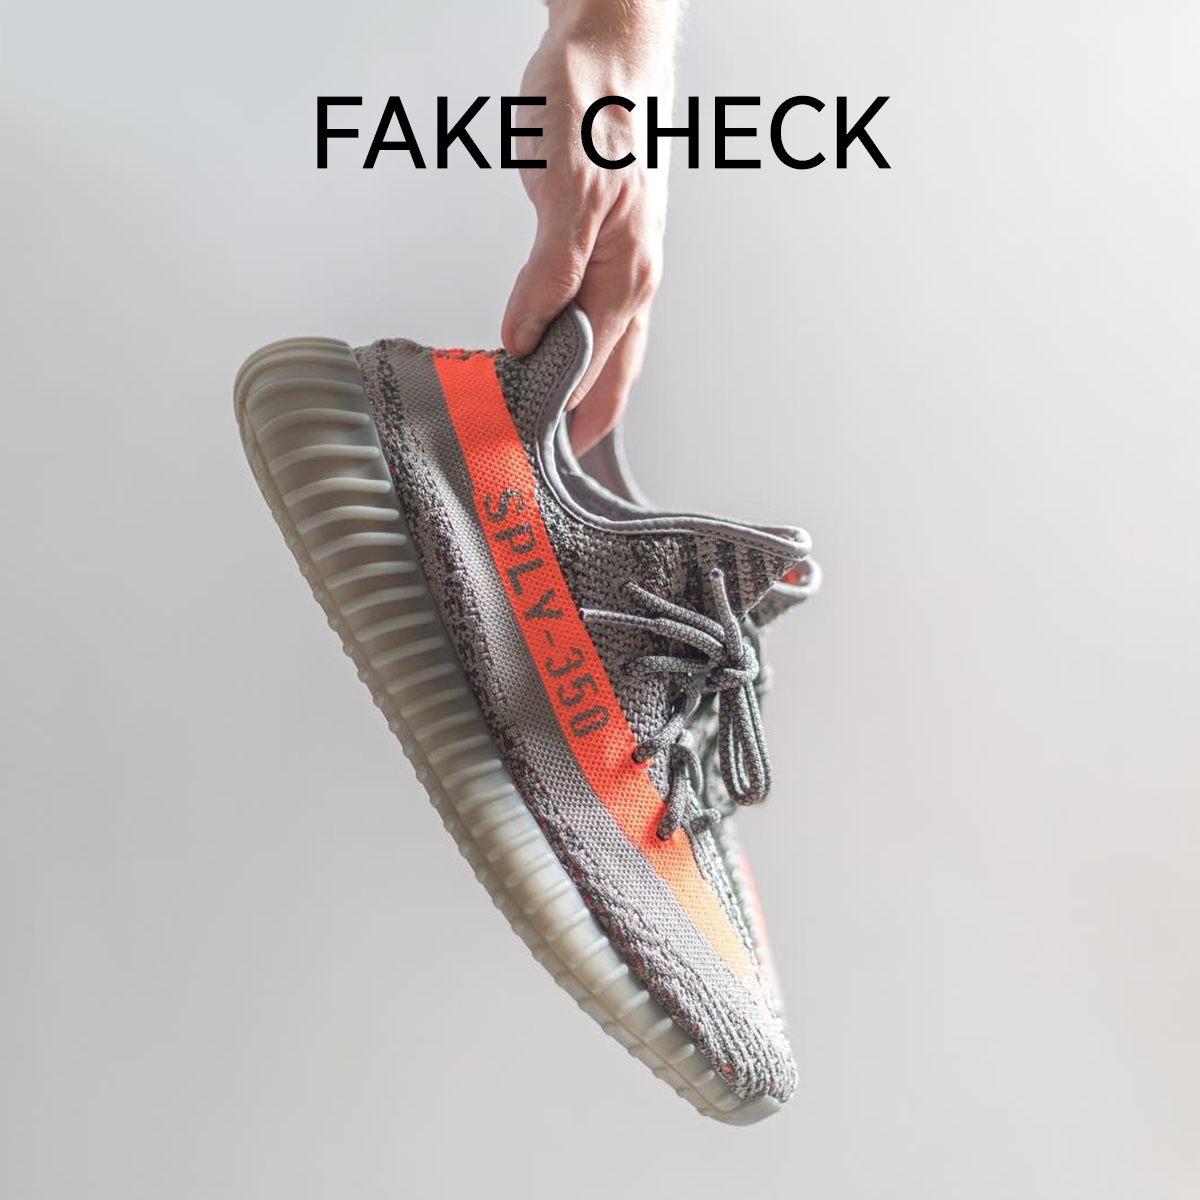 AUTHENTIC Adidas YEEZY BOOST 350 V2 